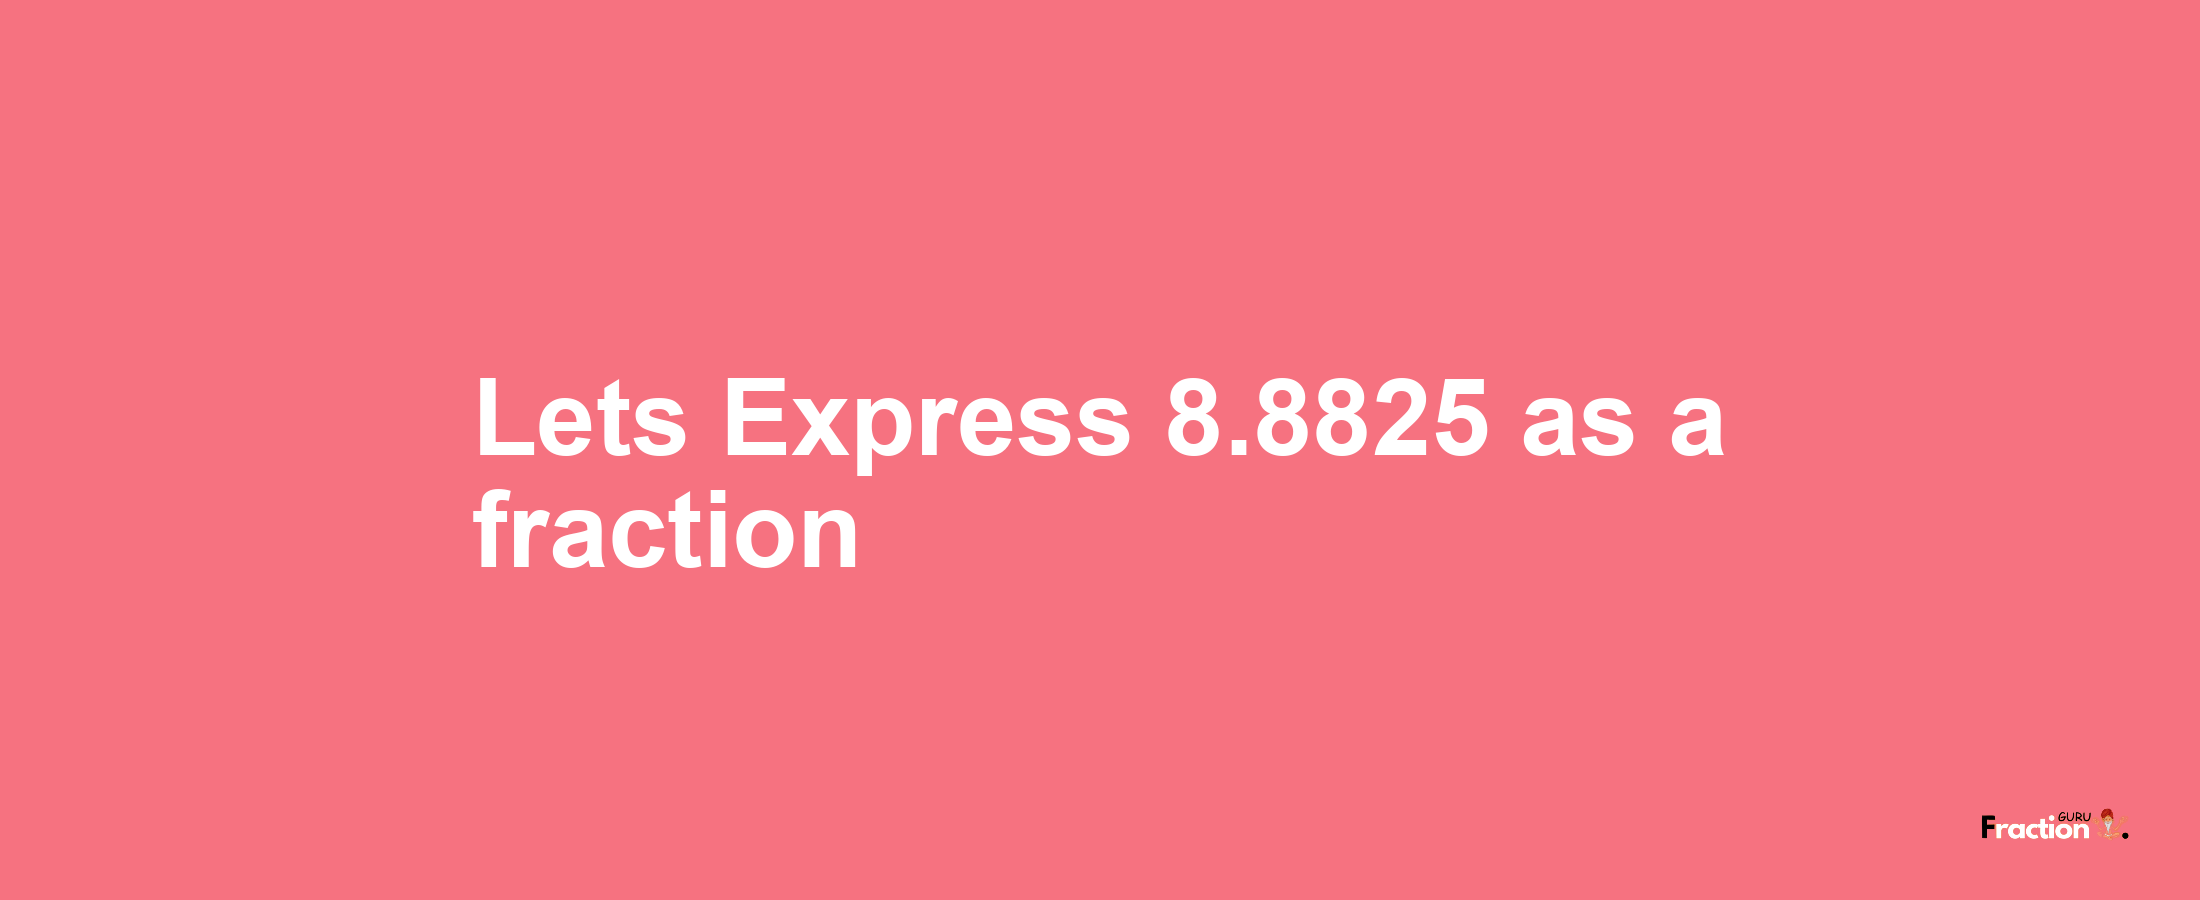 Lets Express 8.8825 as afraction